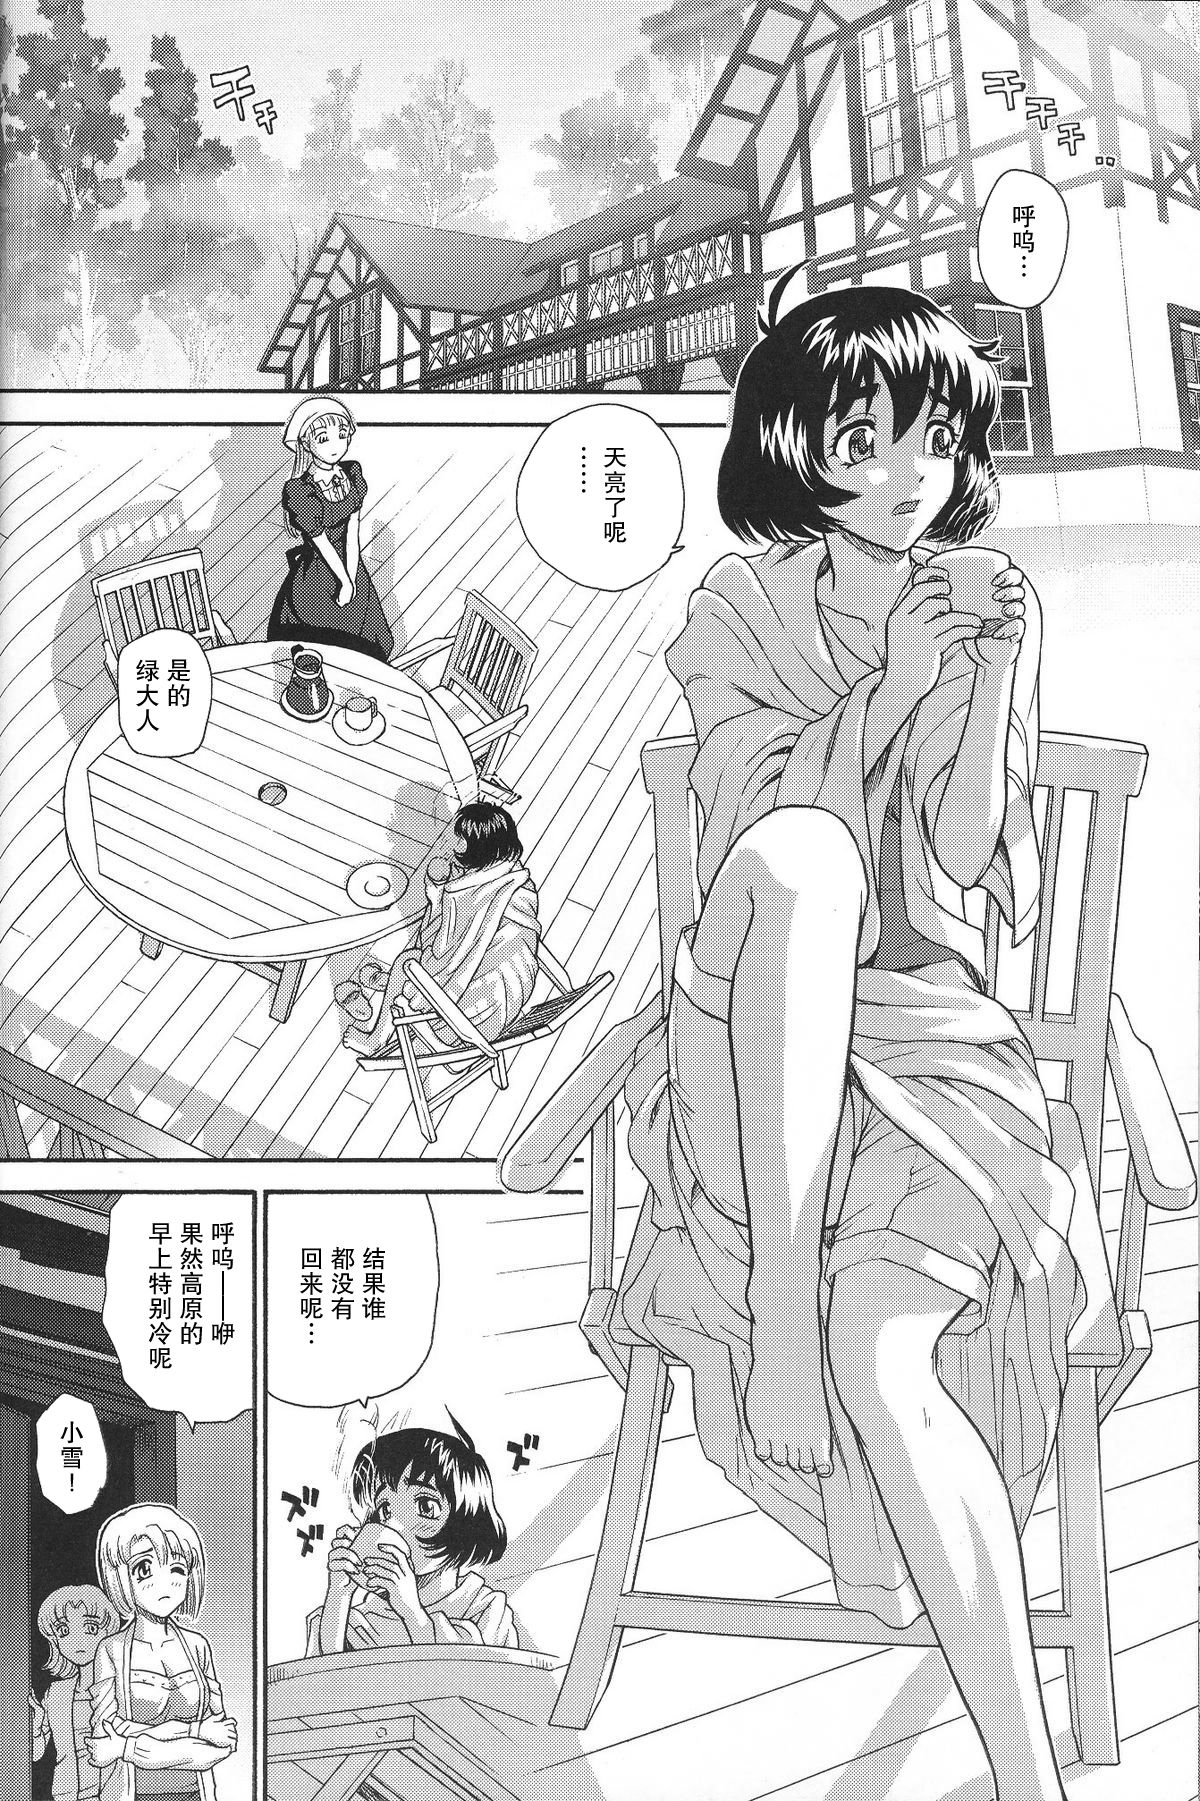 (C71) [Behind Moon (Q)] Dulce Report 8 | 达西报告 8 [Chinese] [哈尼喵汉化组] [Decensored] page 15 full